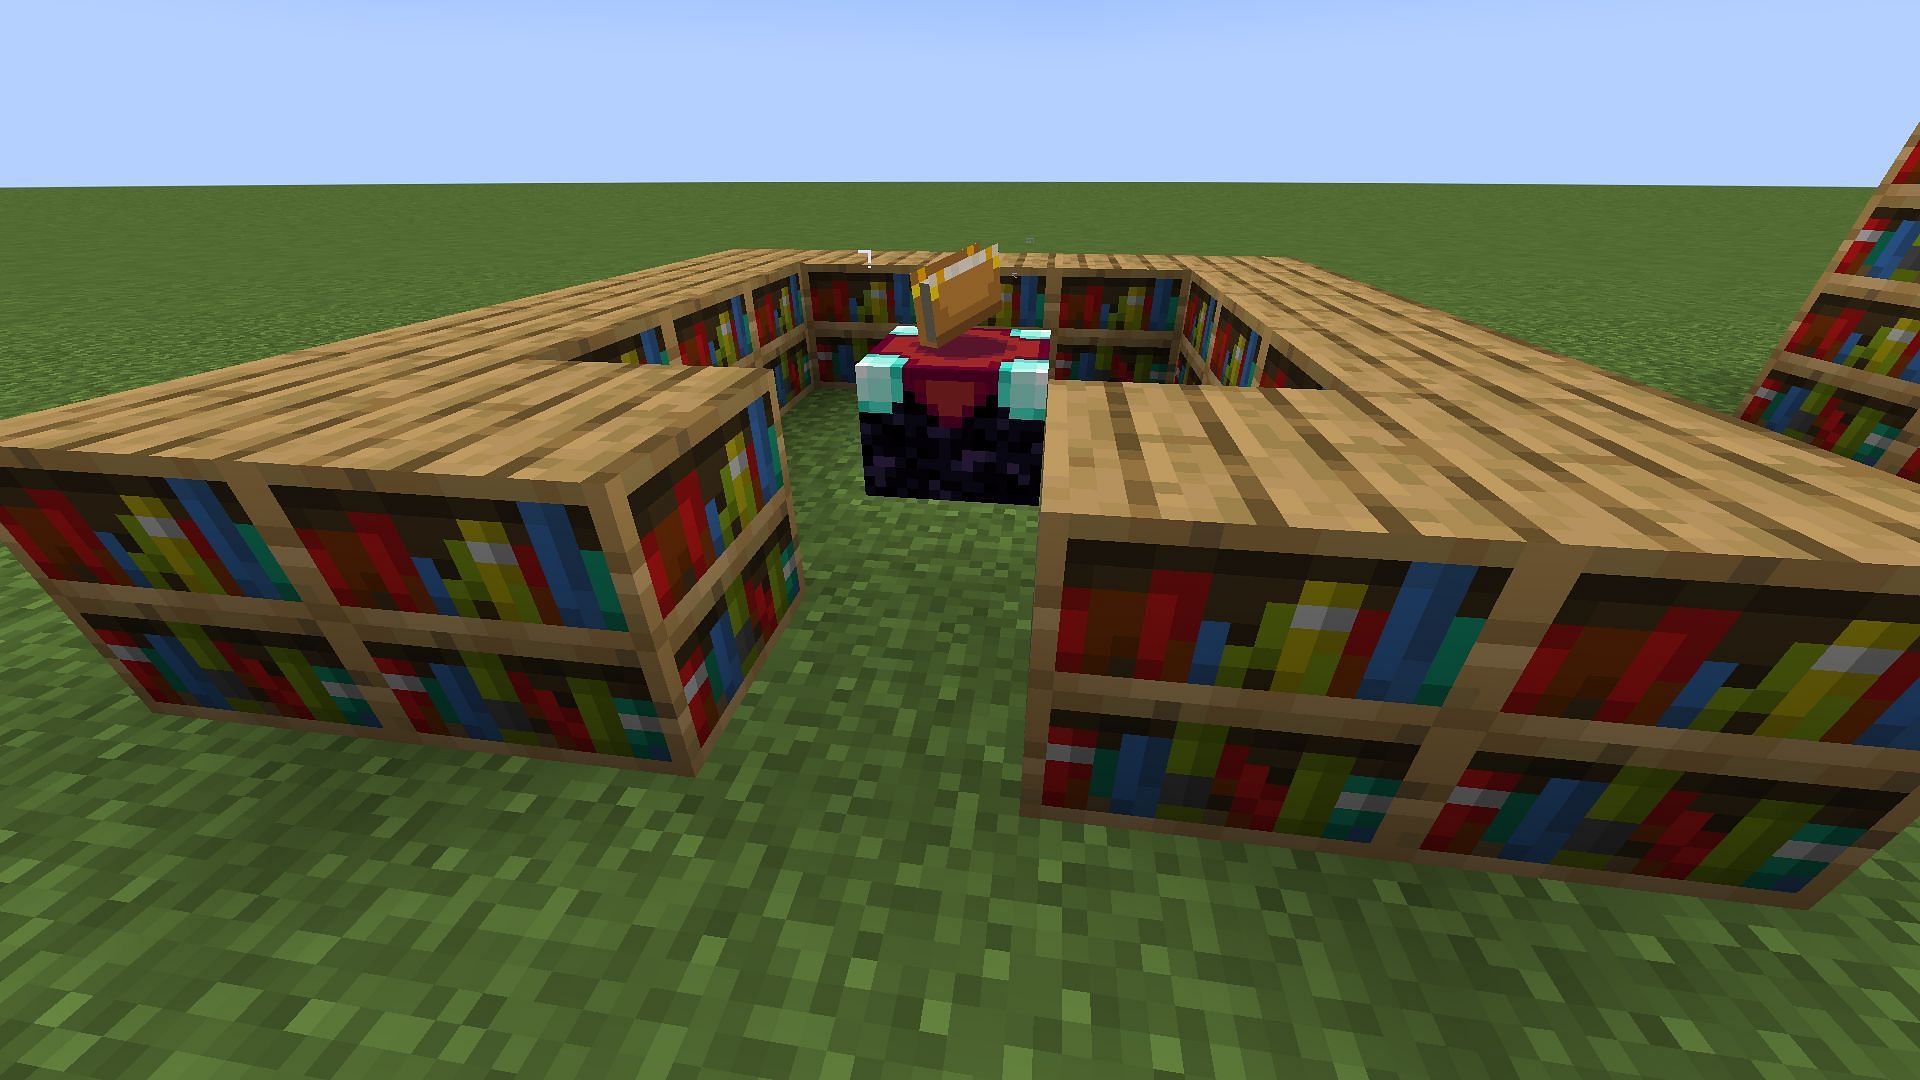 Bookshelves are extremely easy to craft in Minecraft 1.19 (Image via Mojang)